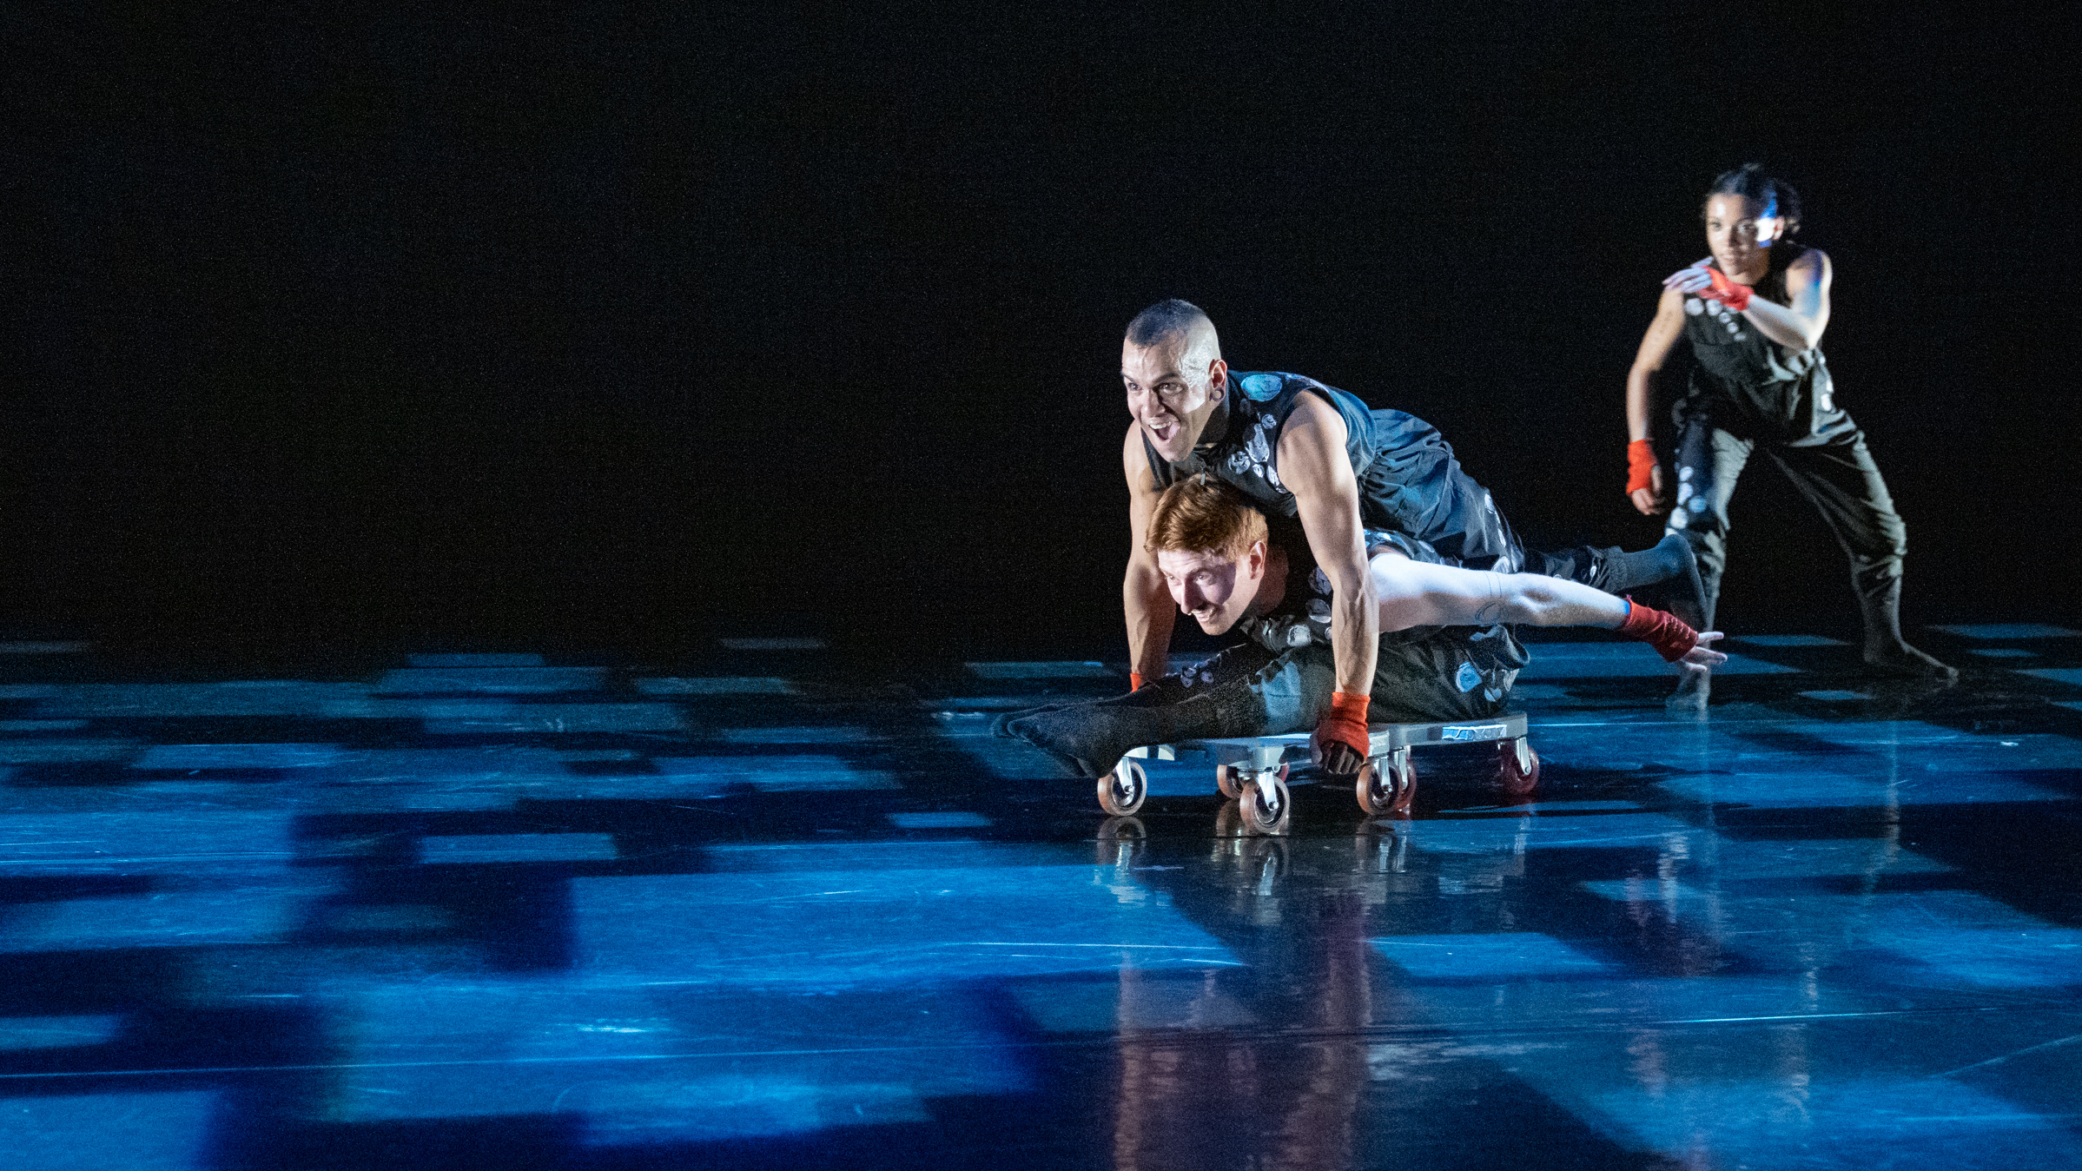 Three dancers on a dark stage with square light projections.